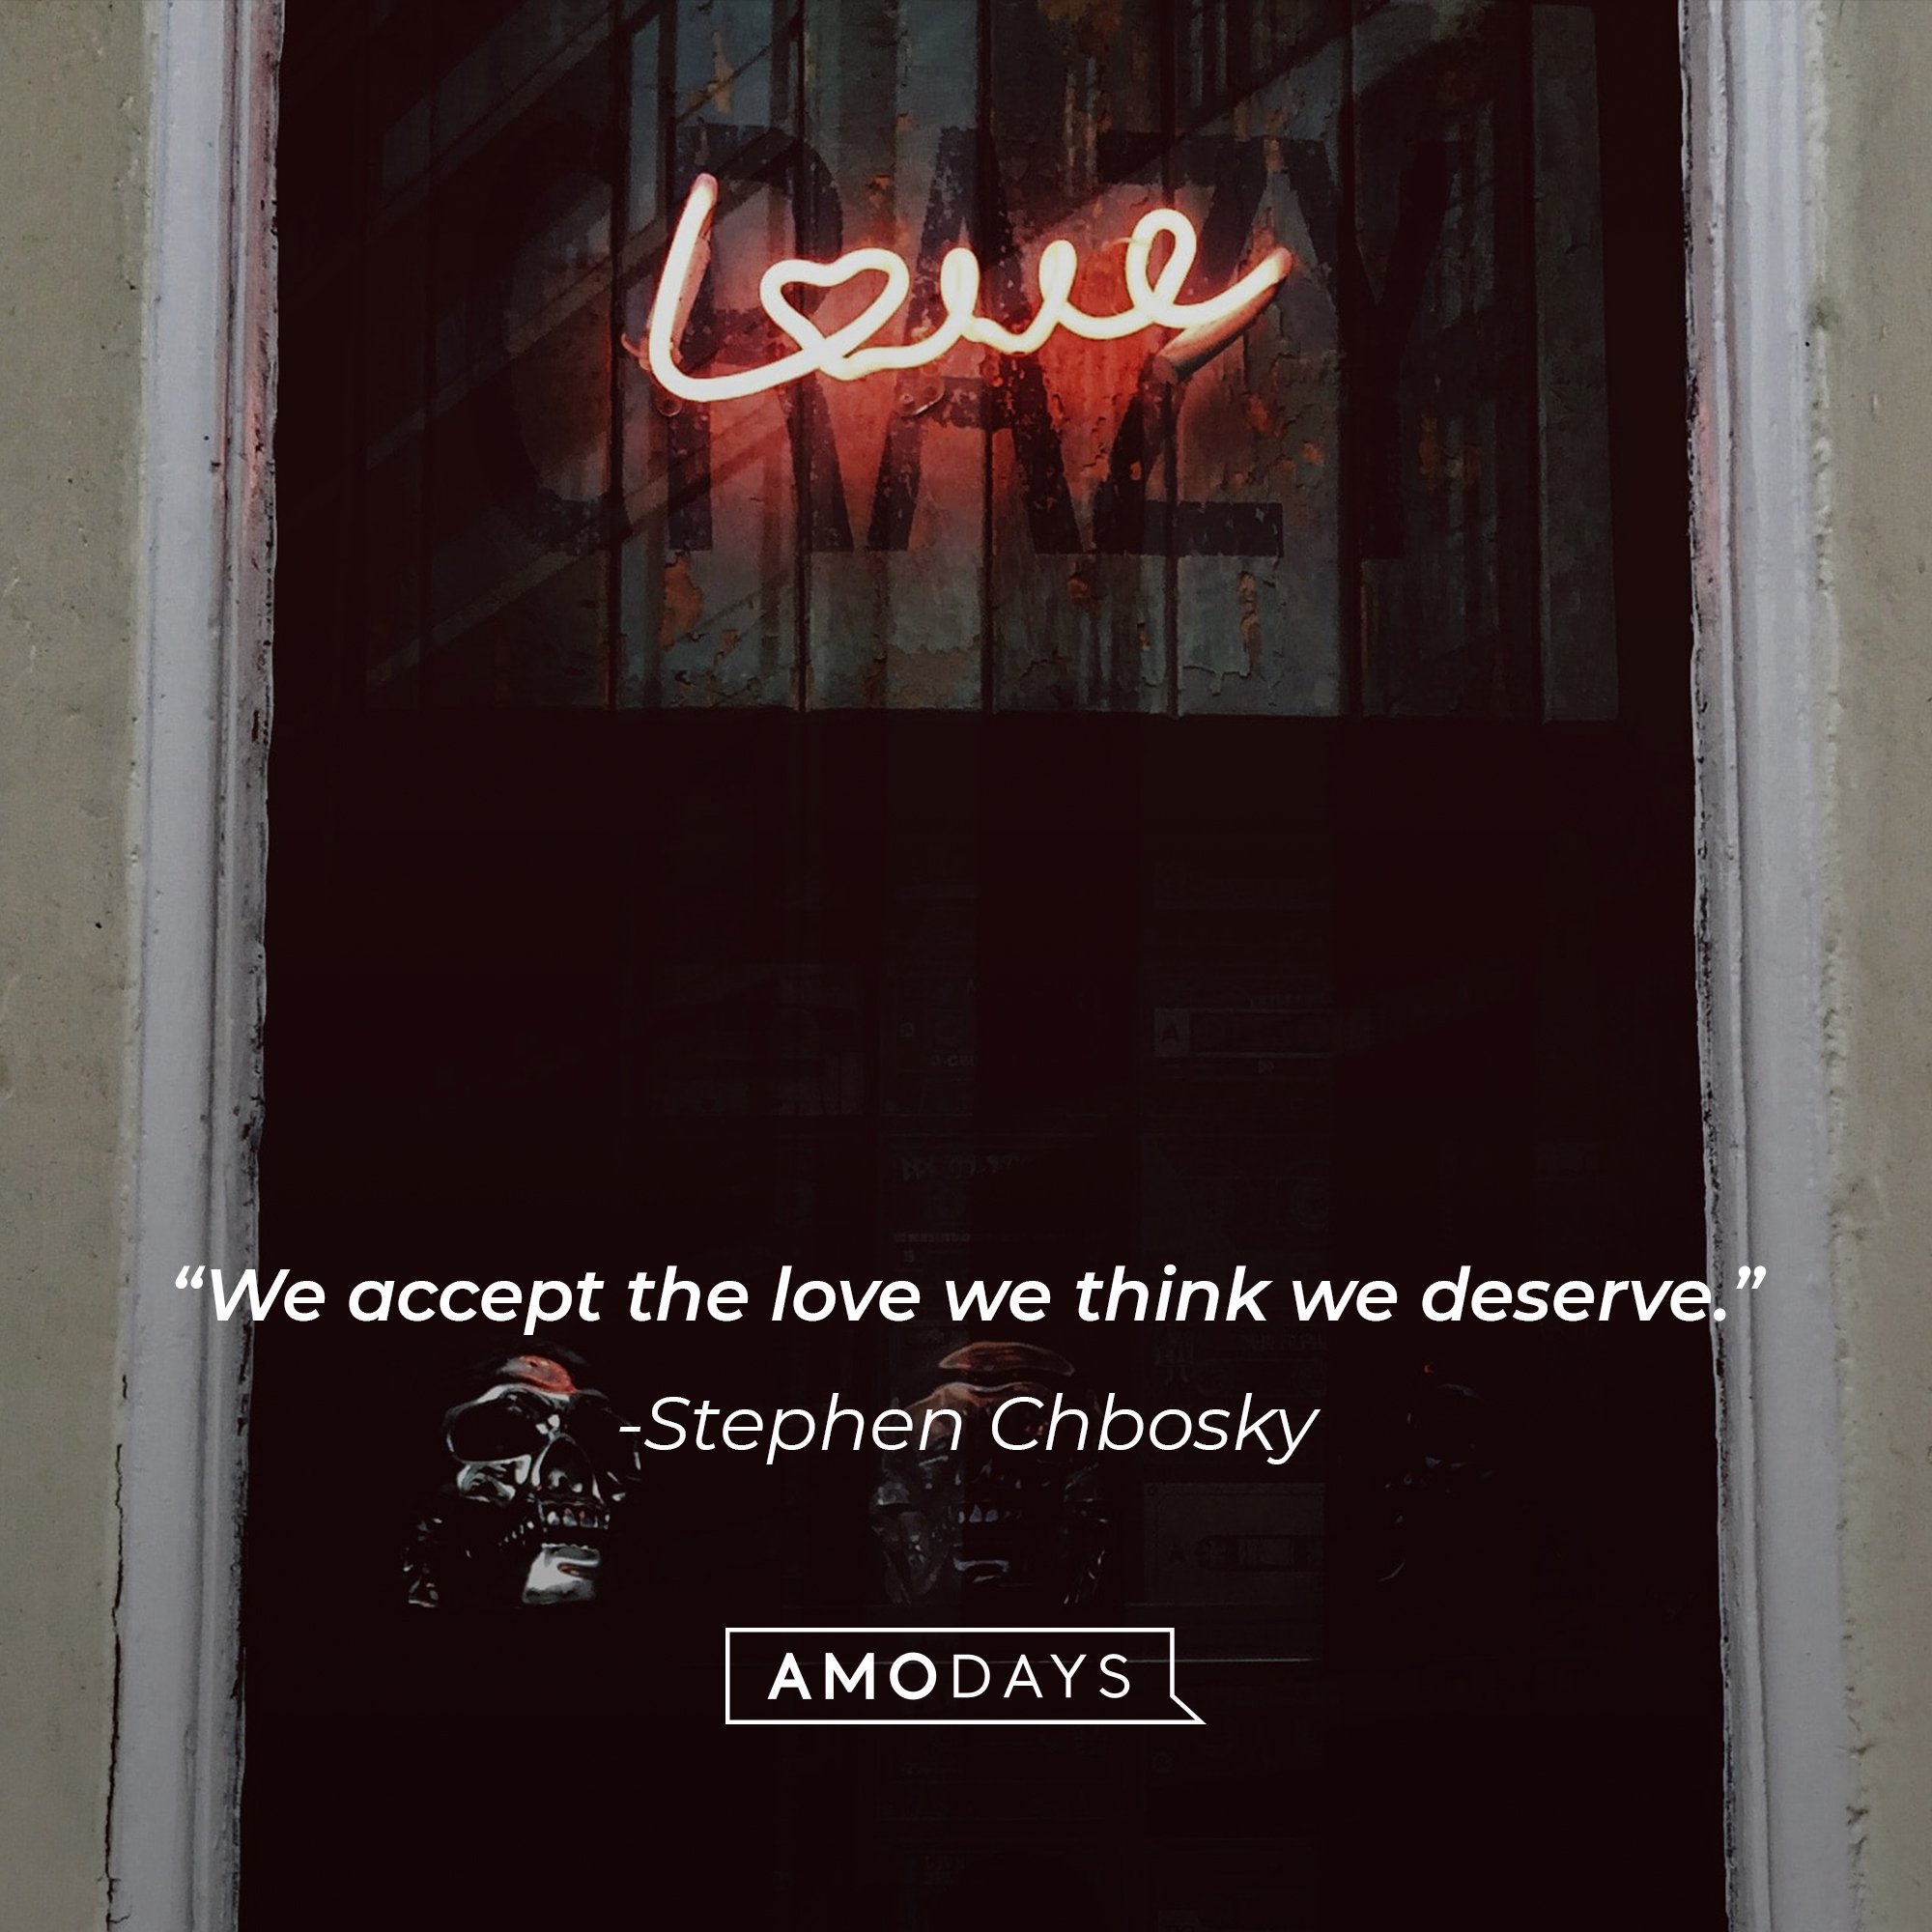 Stephen Chbosky’s quote: "We accept the love we think we deserve." | Image: AmoDays